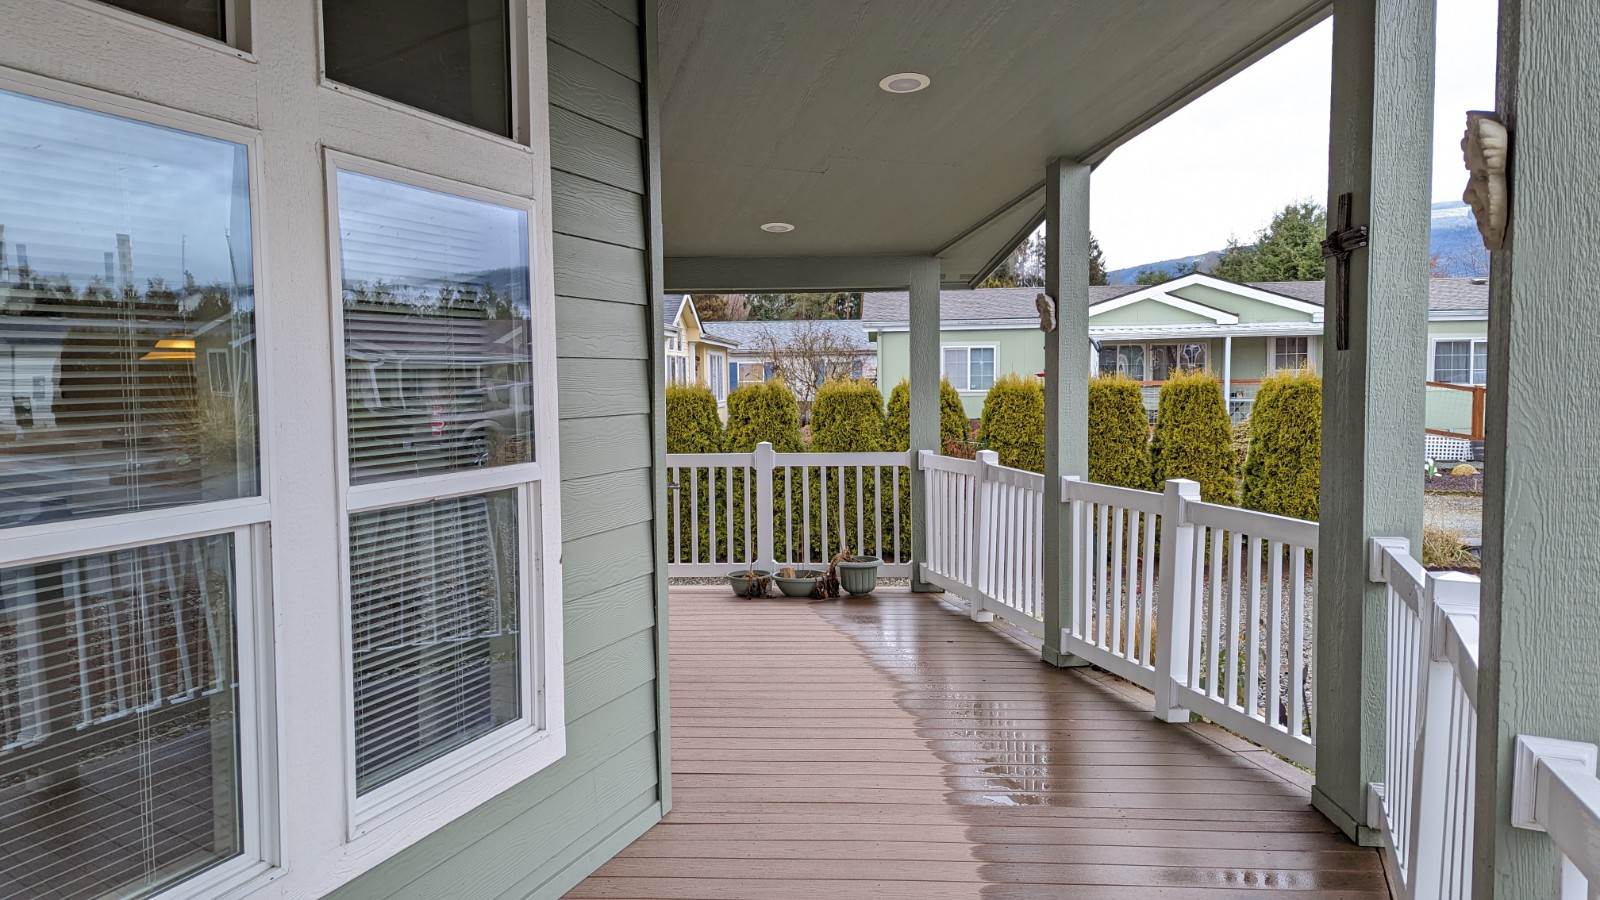 878 Carriage Court, #40, Sedro Woolley, WA 98284